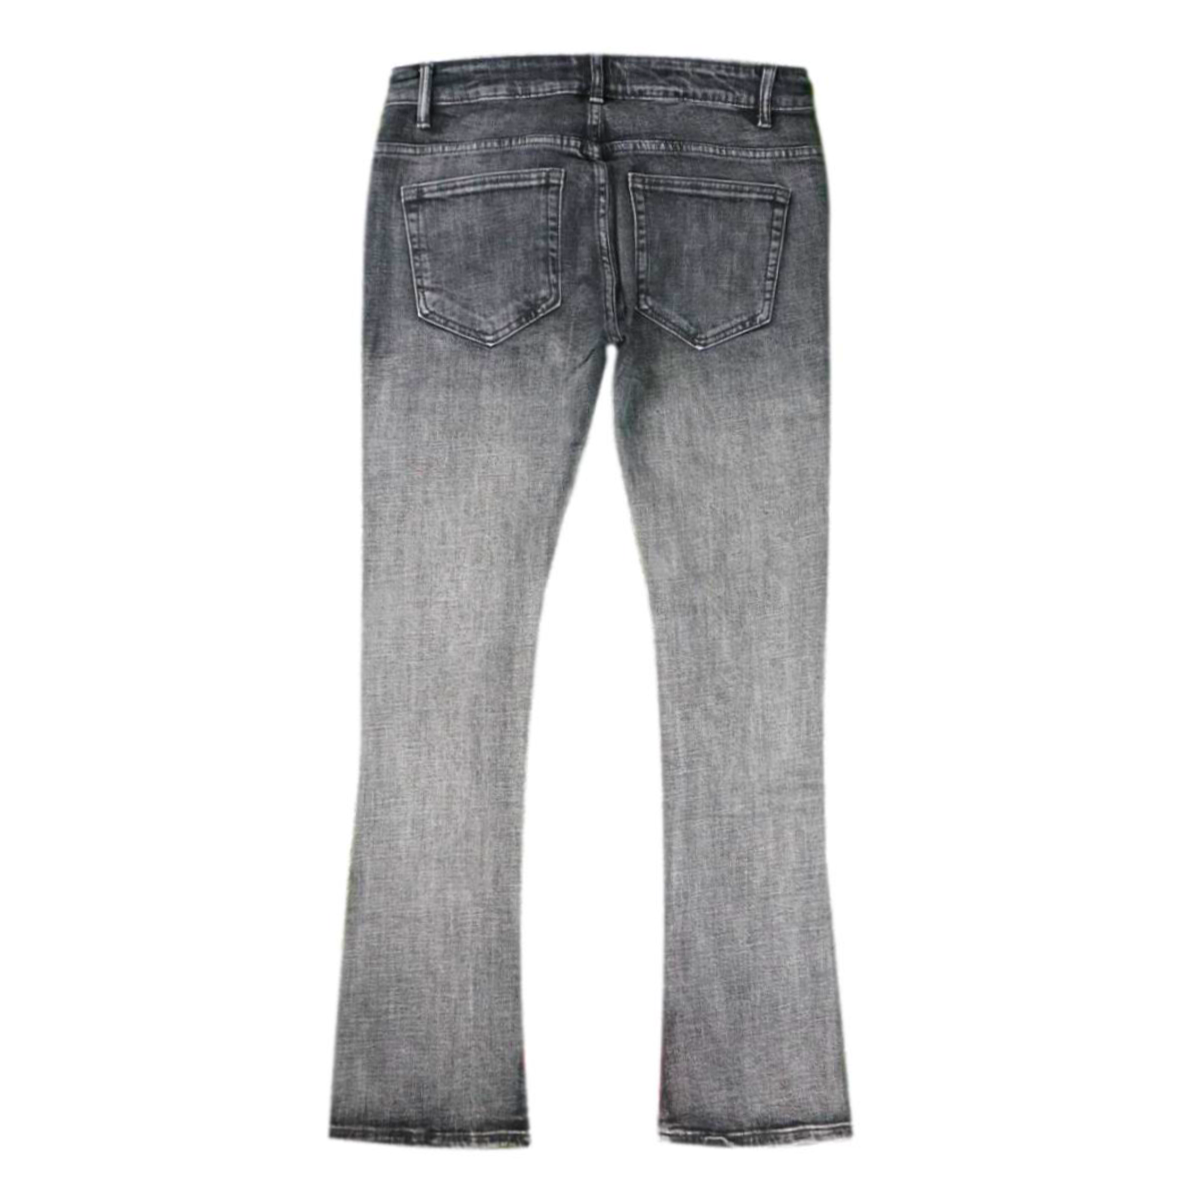 508 Flame Double Knee Stack Denim (Red/Grey Wash) /C7